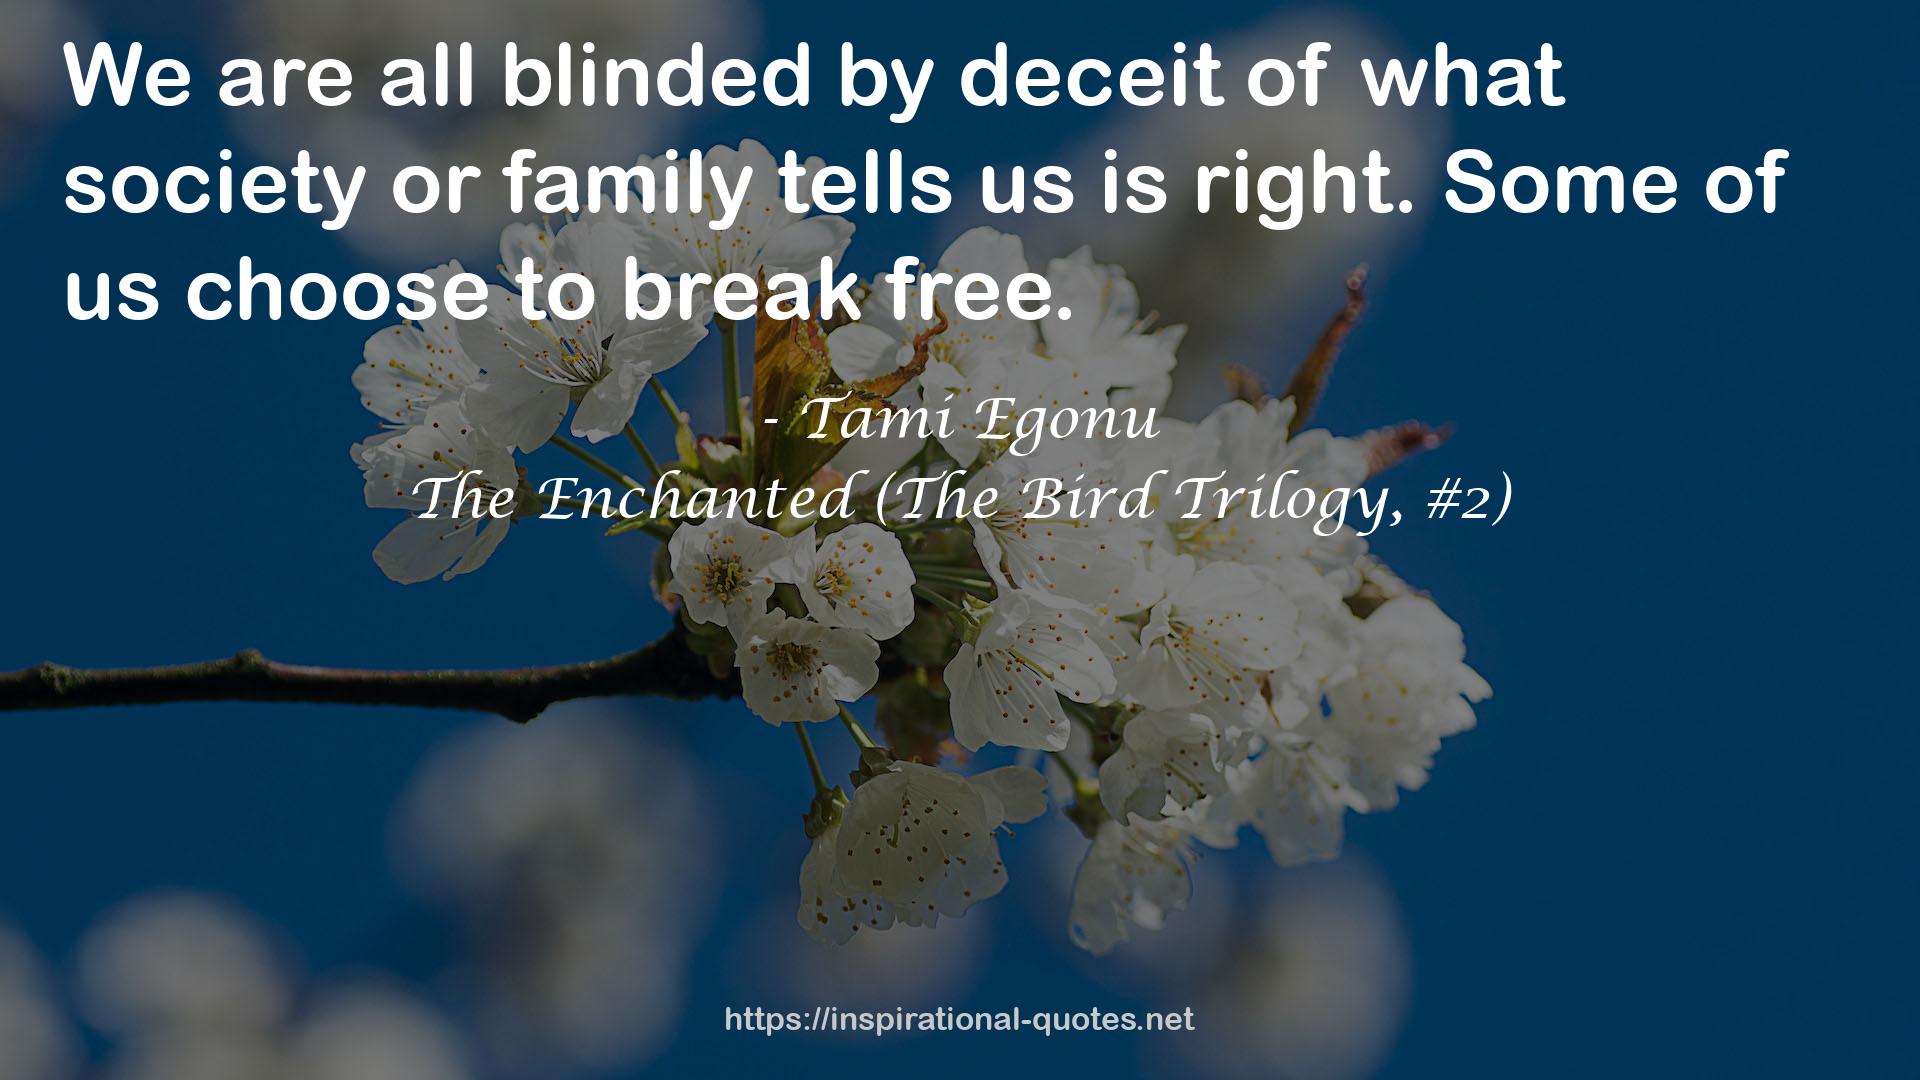 The Enchanted (The Bird Trilogy, #2) QUOTES